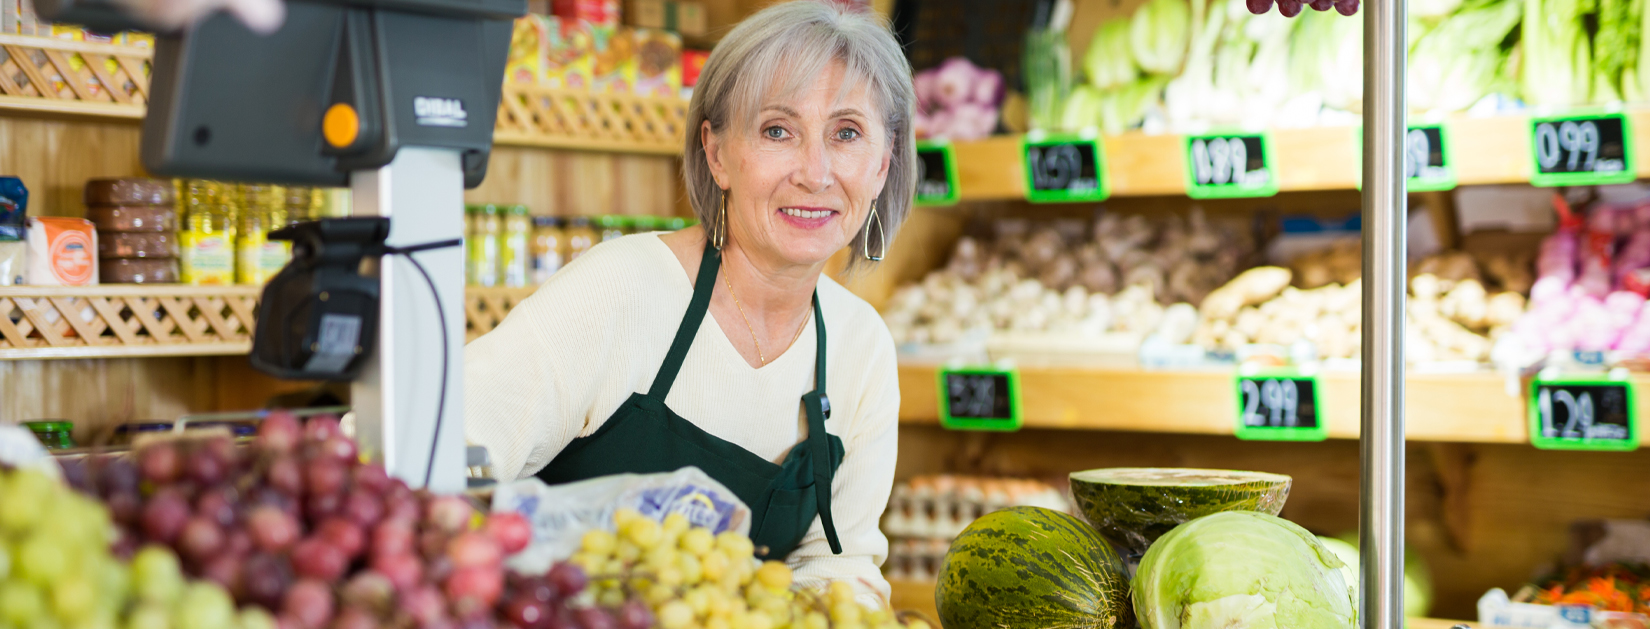 older woman standing behind grocery checkout counter with produce in front of her